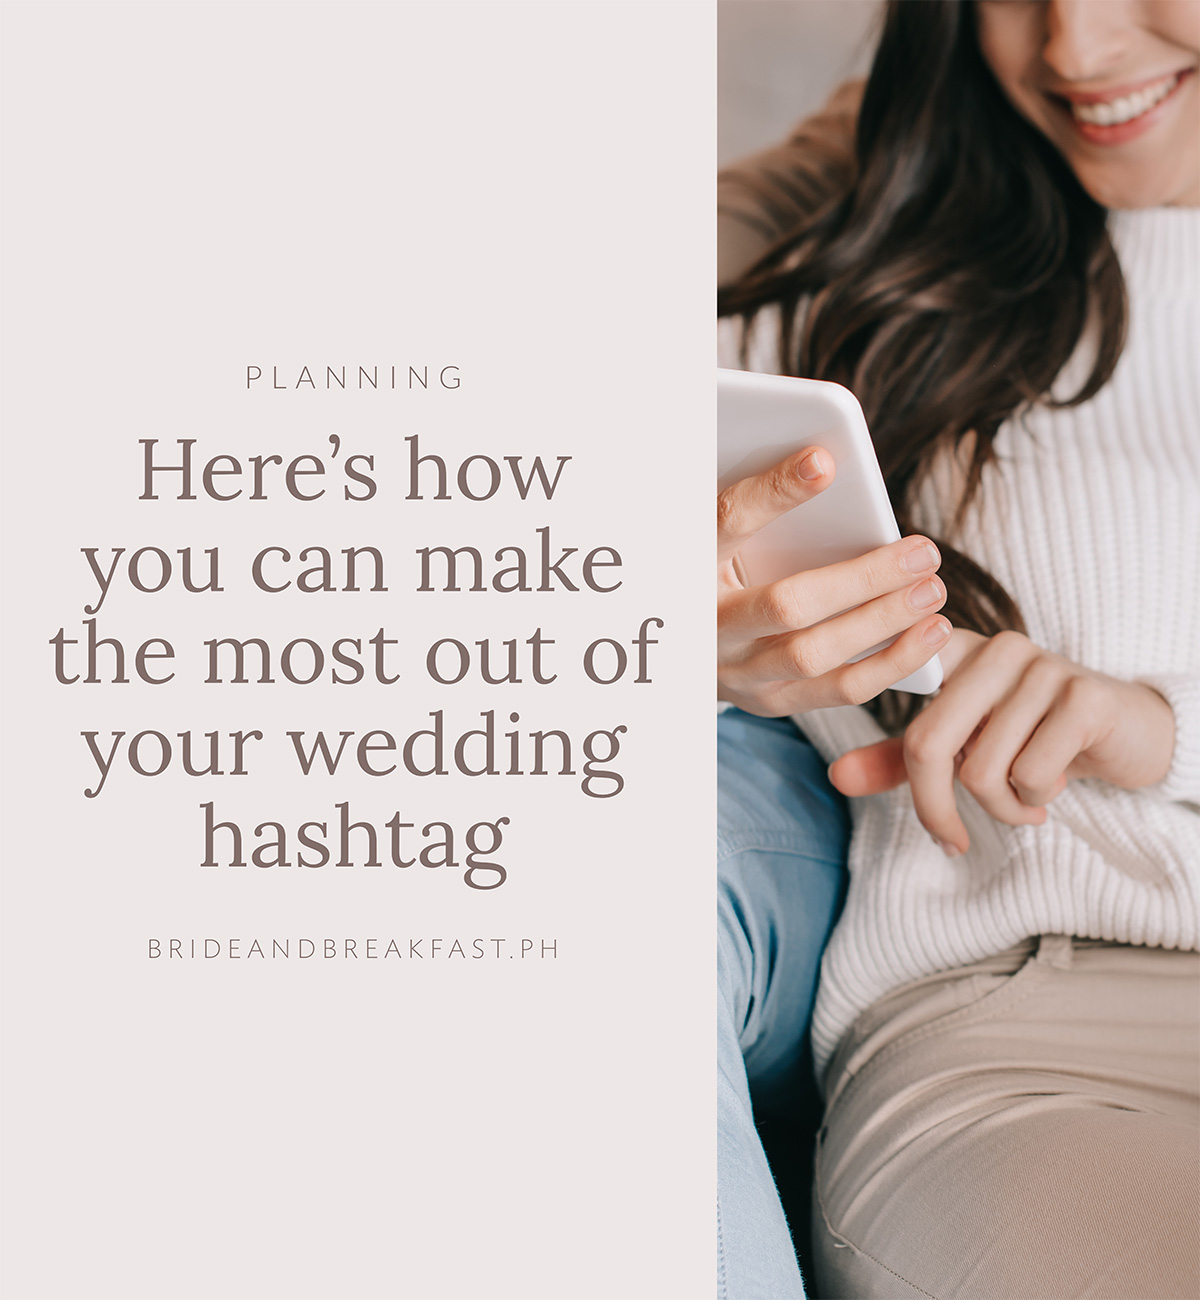 Here's How You Can Make the Most Out of Your Wedding Hashtag